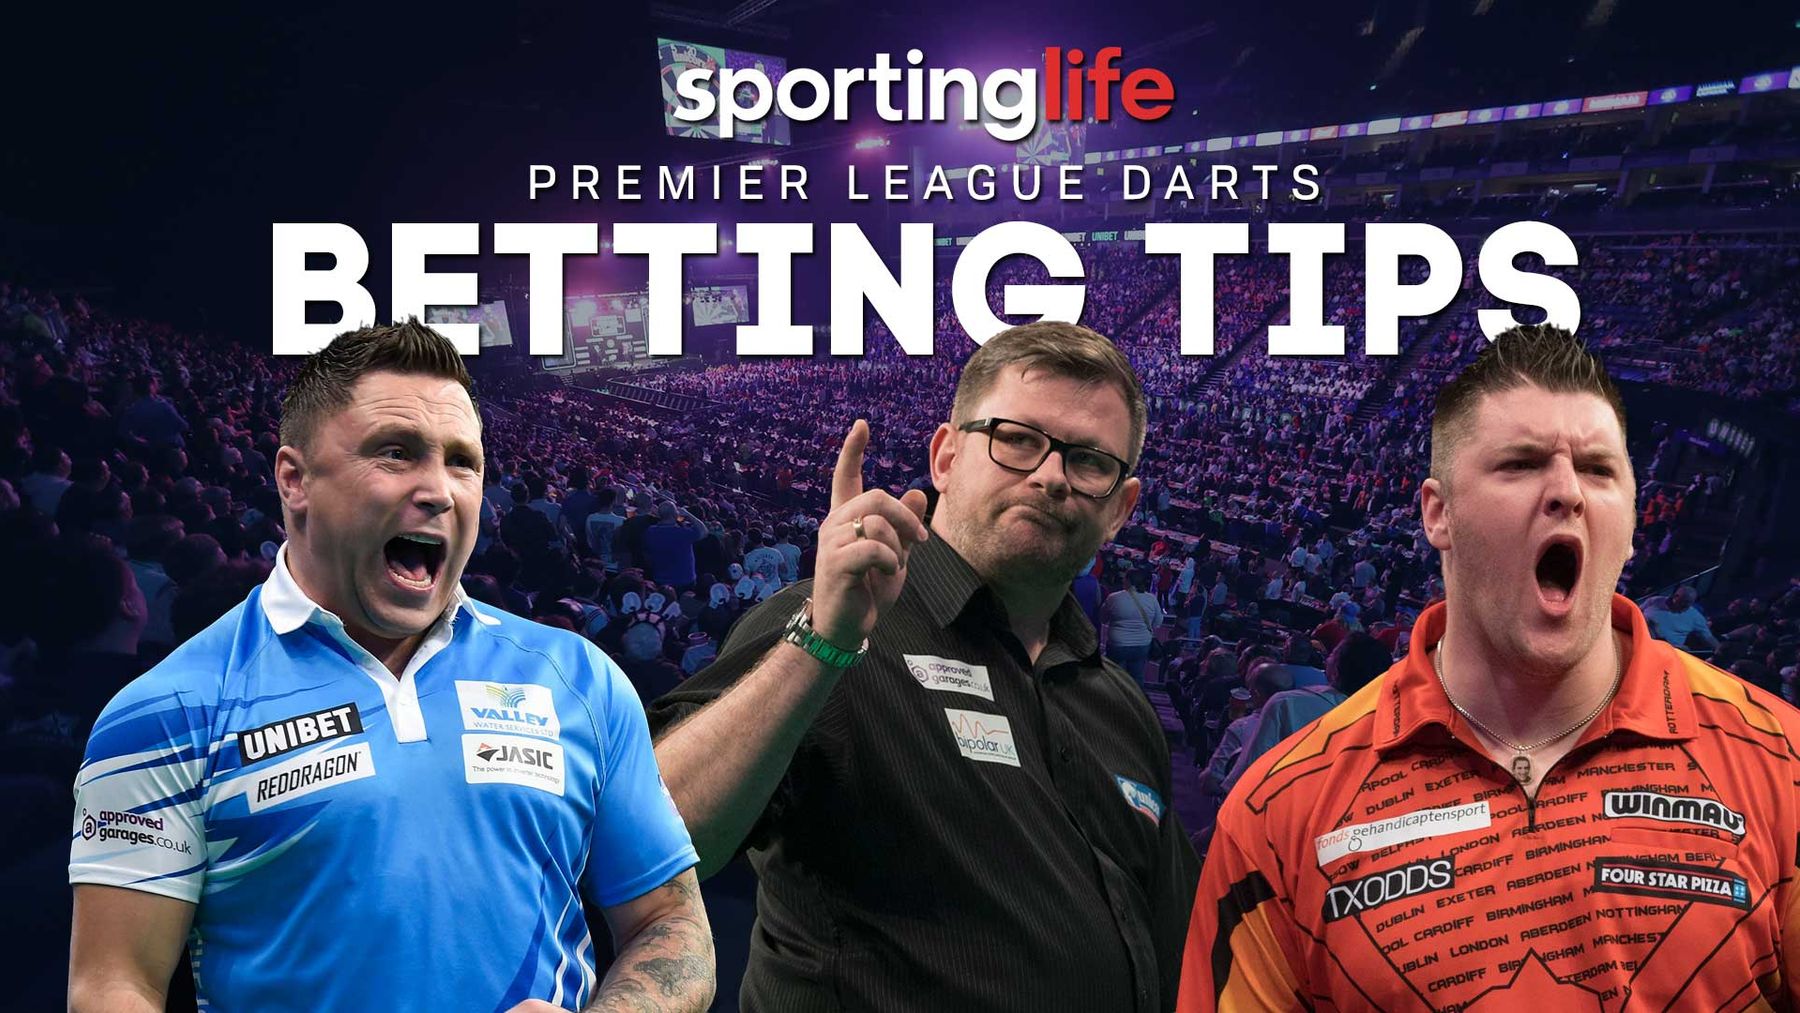 Premier League Darts: 14 predictions, stats, betting tips, accas, order of play in Manchester & TV time